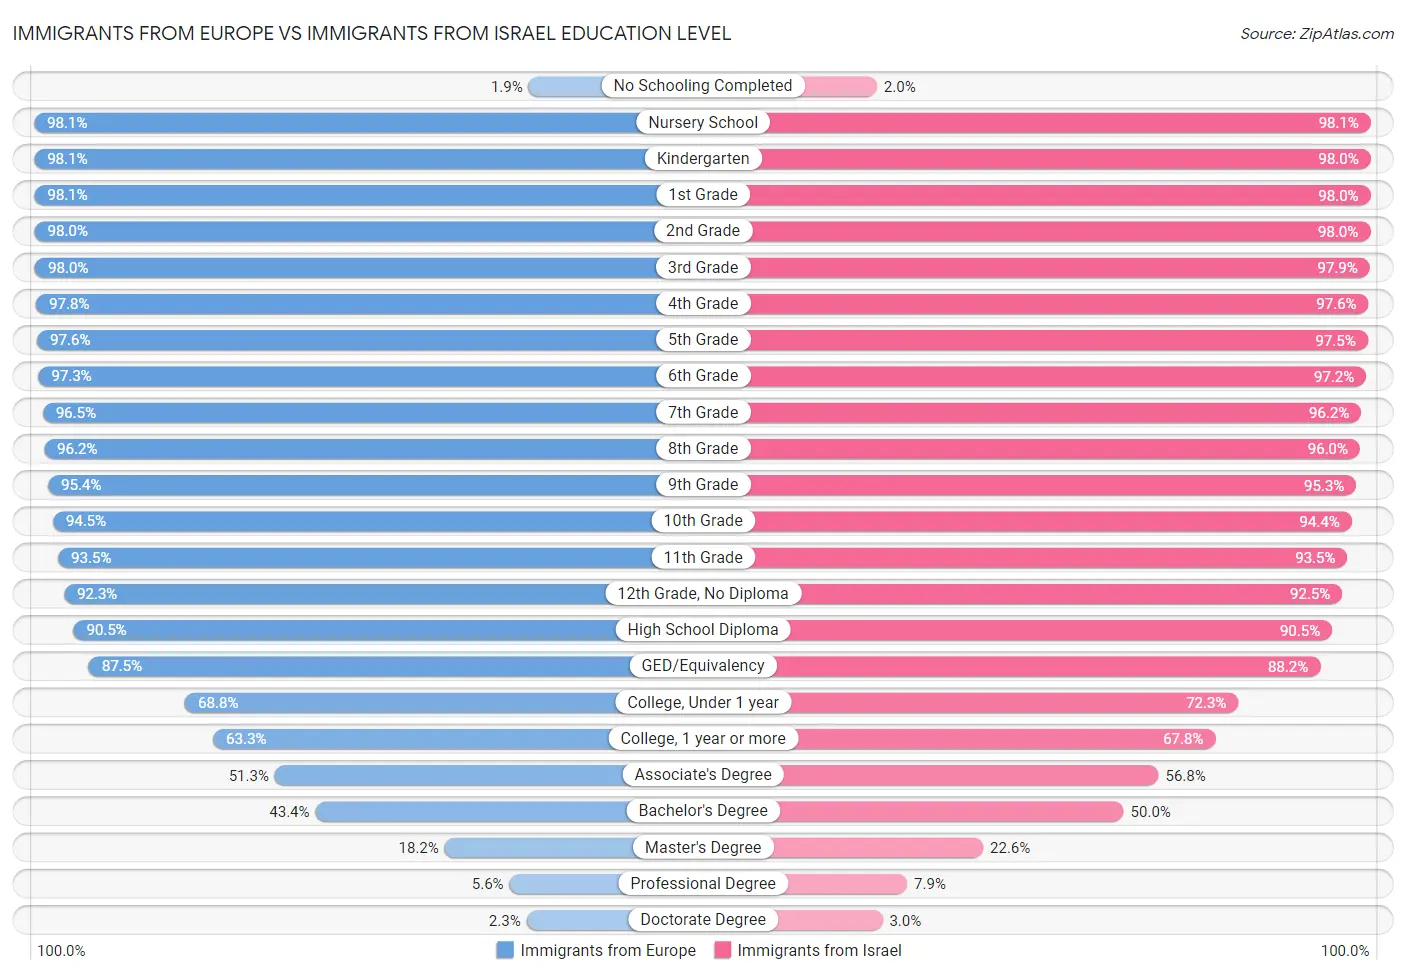 Immigrants from Europe vs Immigrants from Israel Education Level